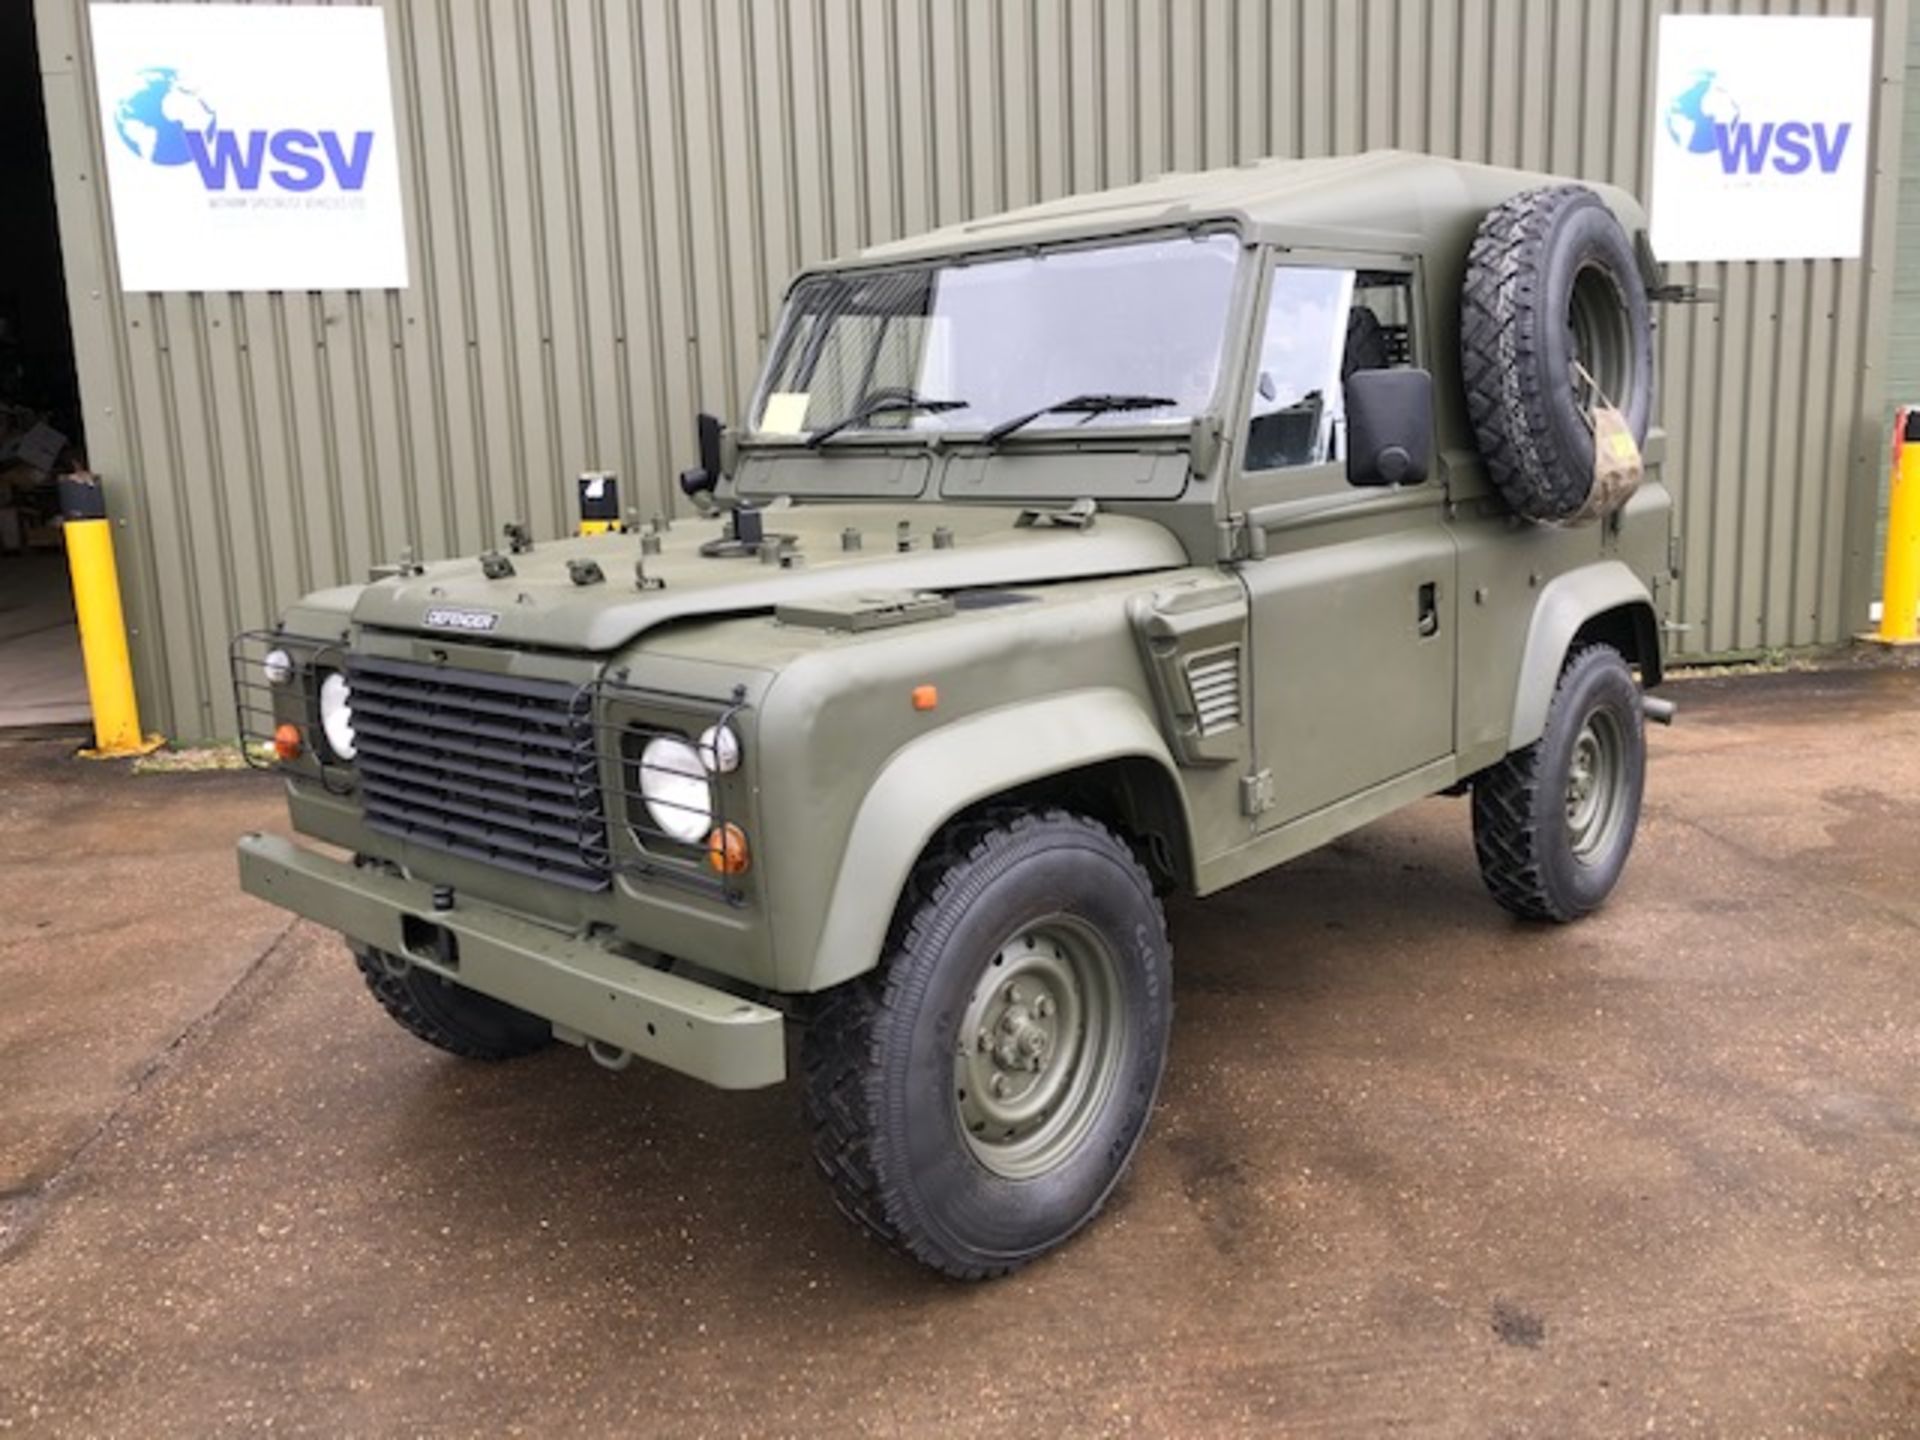 1998 Land Rover Wolf 90 Hard Top with Remus upgrade ONLY 73,650km - approx 45,000 miles! - Image 3 of 42